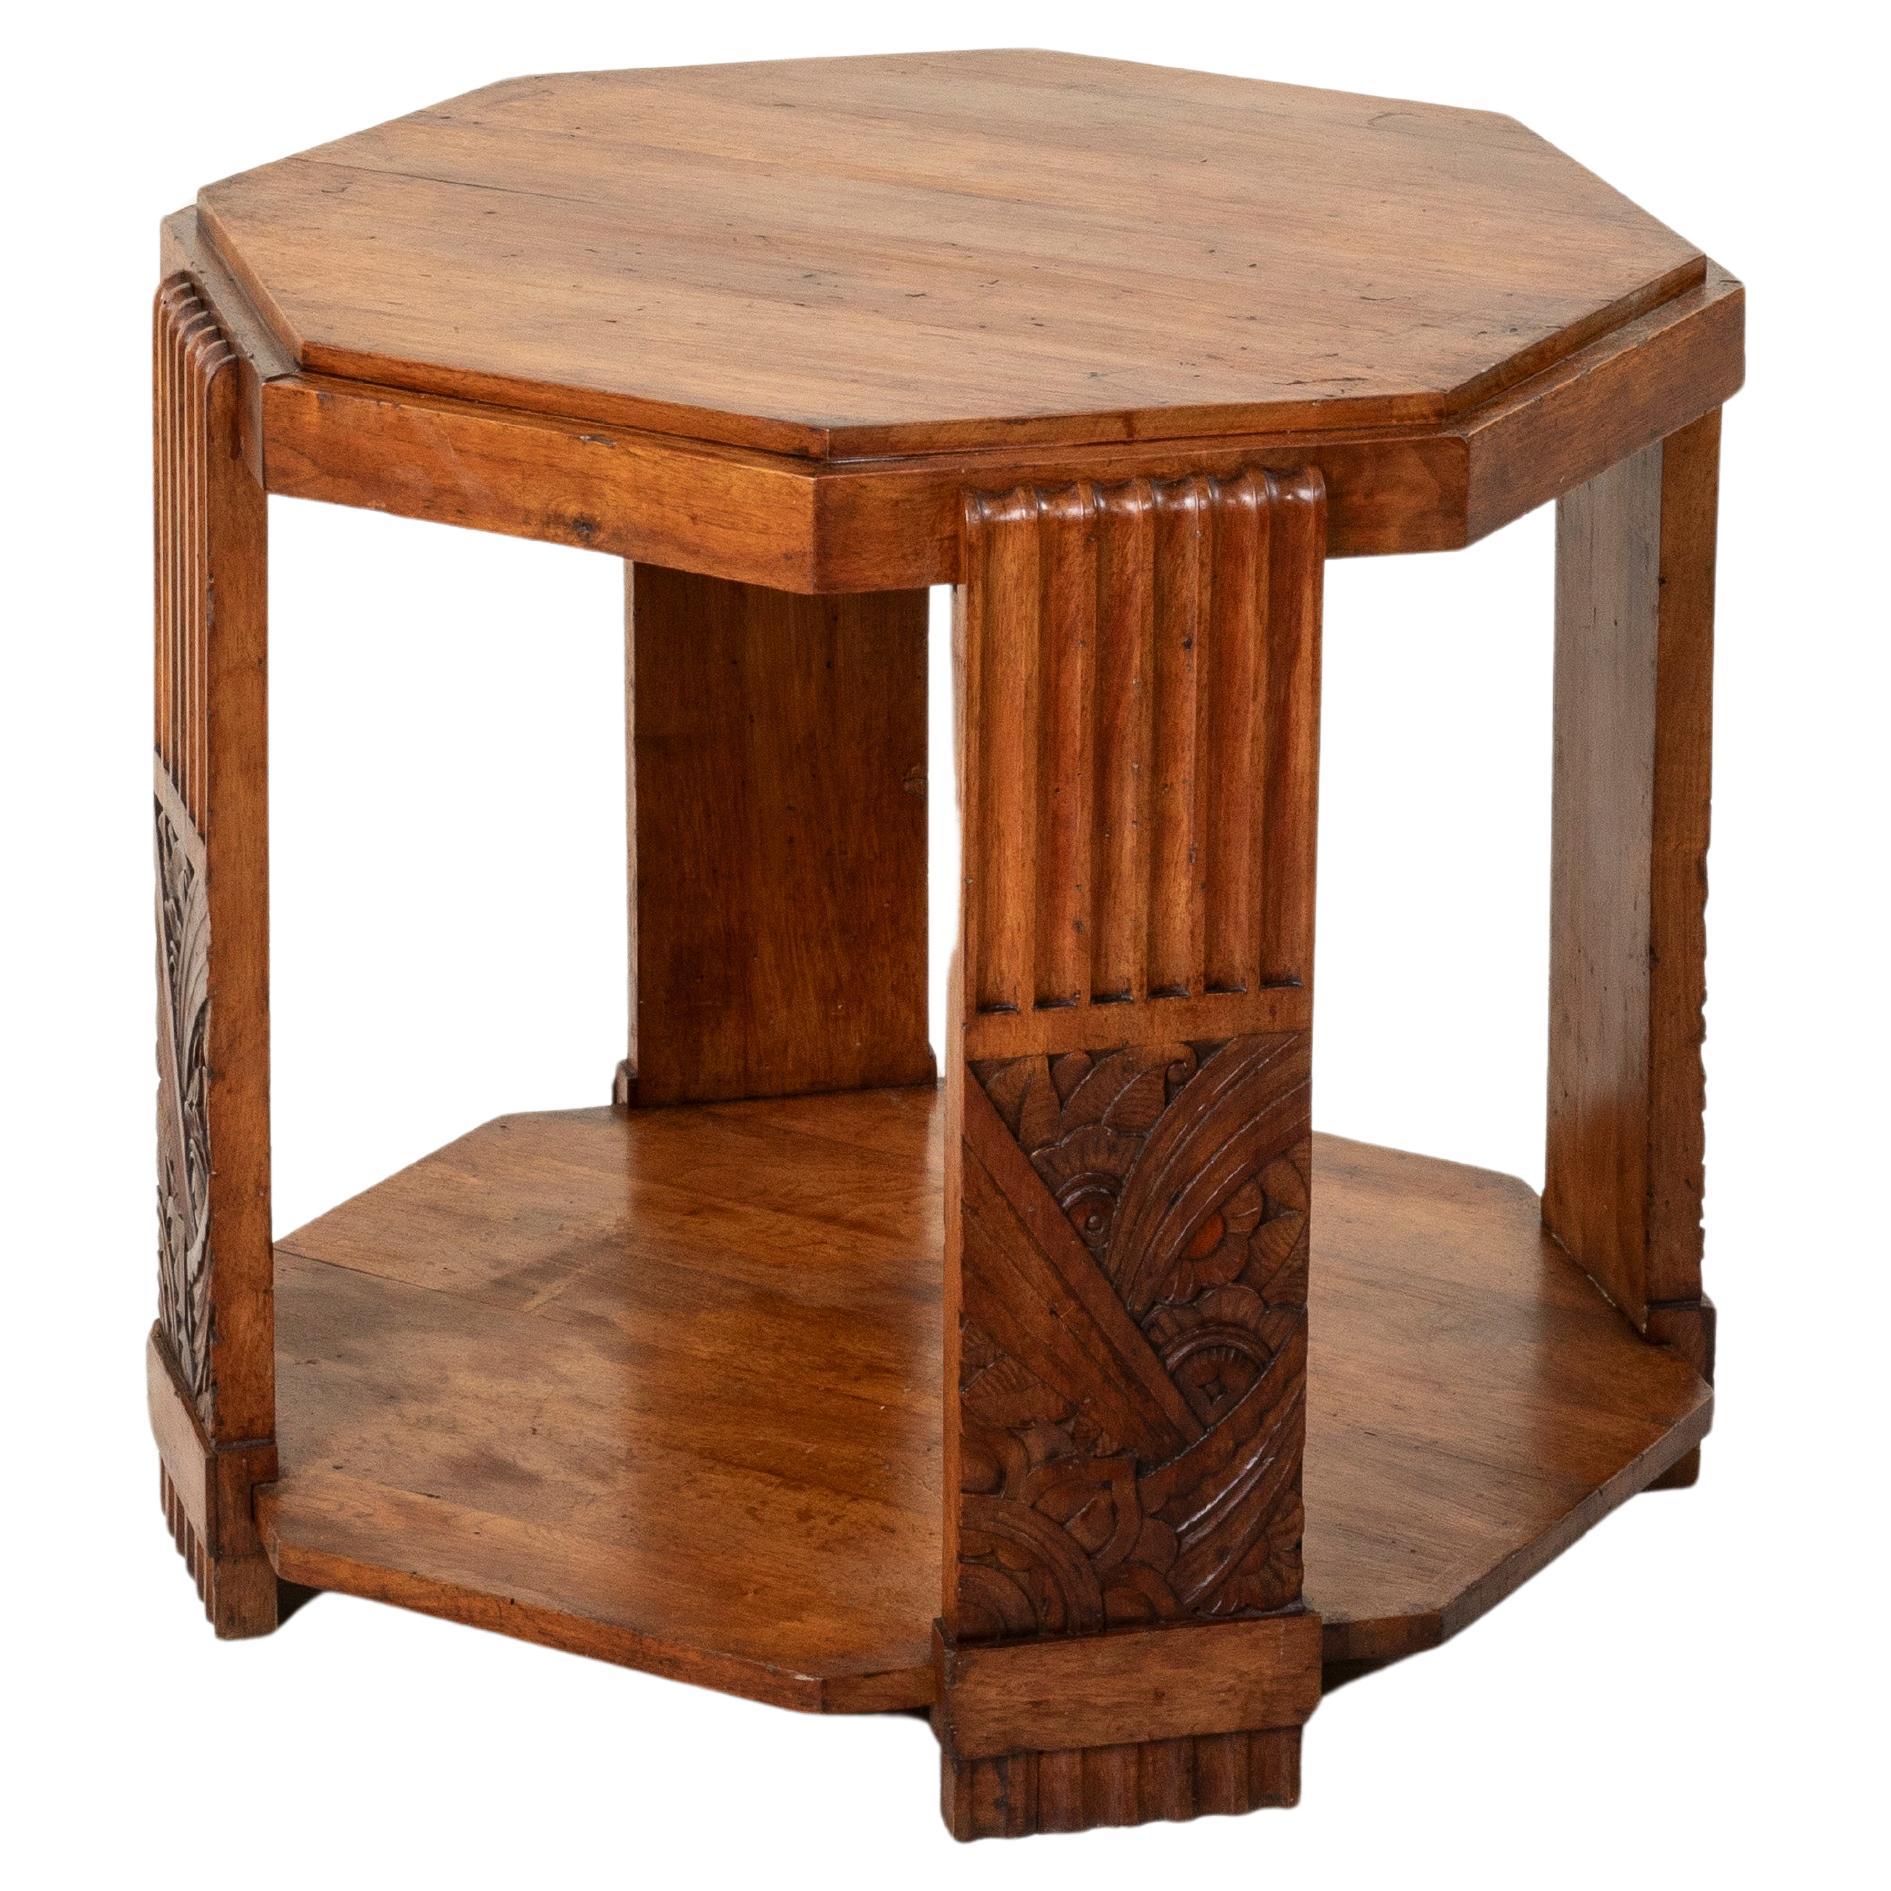 Early 20th Century French Art Deco Period Walnut Coffee Table or Cocktail Table For Sale